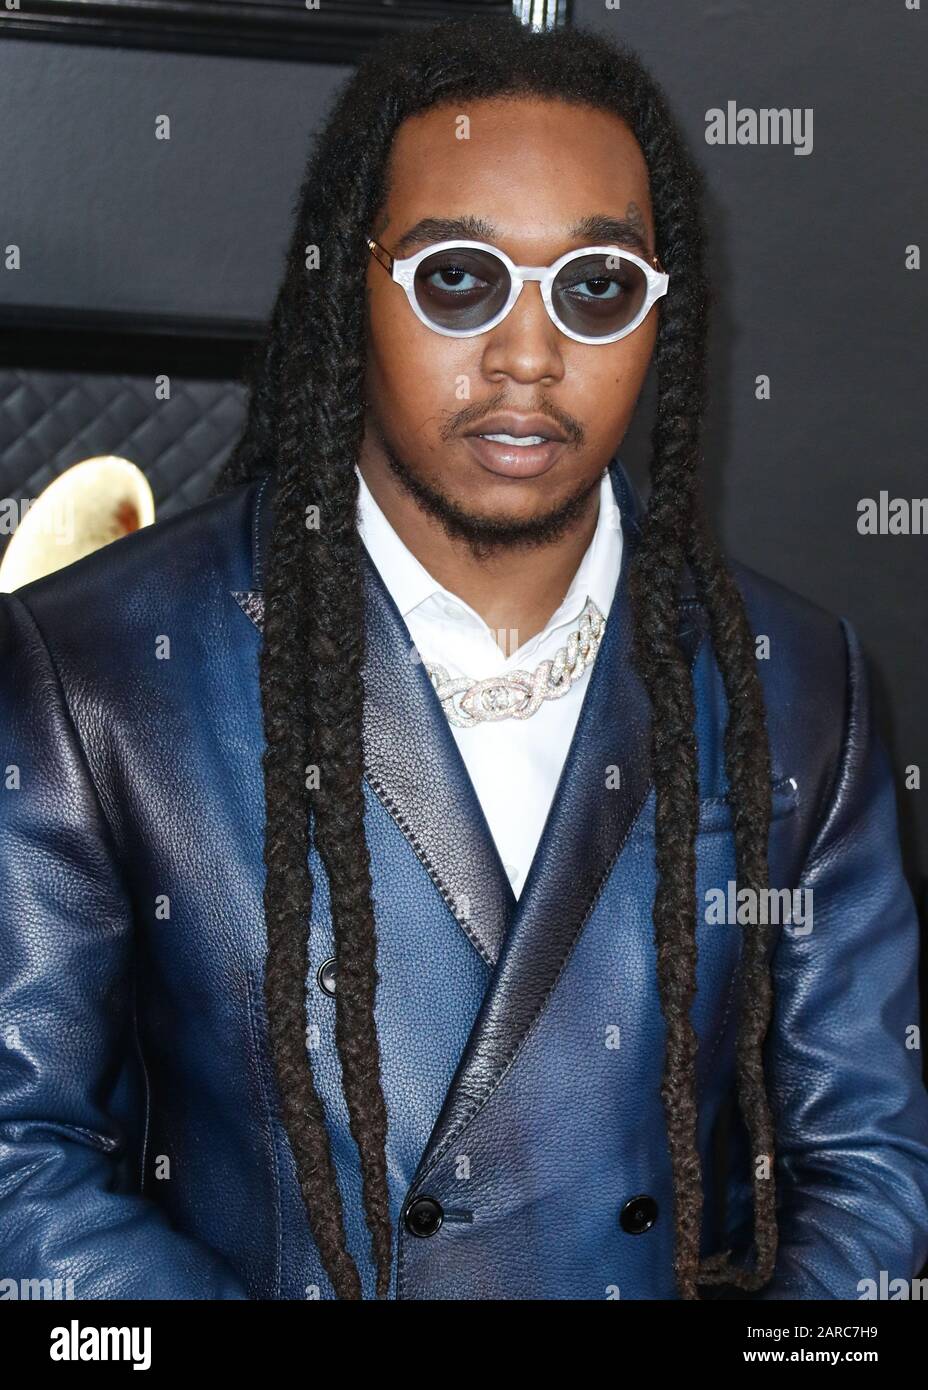 LOS ANGELES, CALIFORNIA, USA - JANUARY 26: Takeoff arrives at the 62nd Annual GRAMMY Awards held at Staples Center on January 26, 2020 in Los Angeles, California, United States. (Photo by Xavier Collin/Image Press Agency) Stock Photo